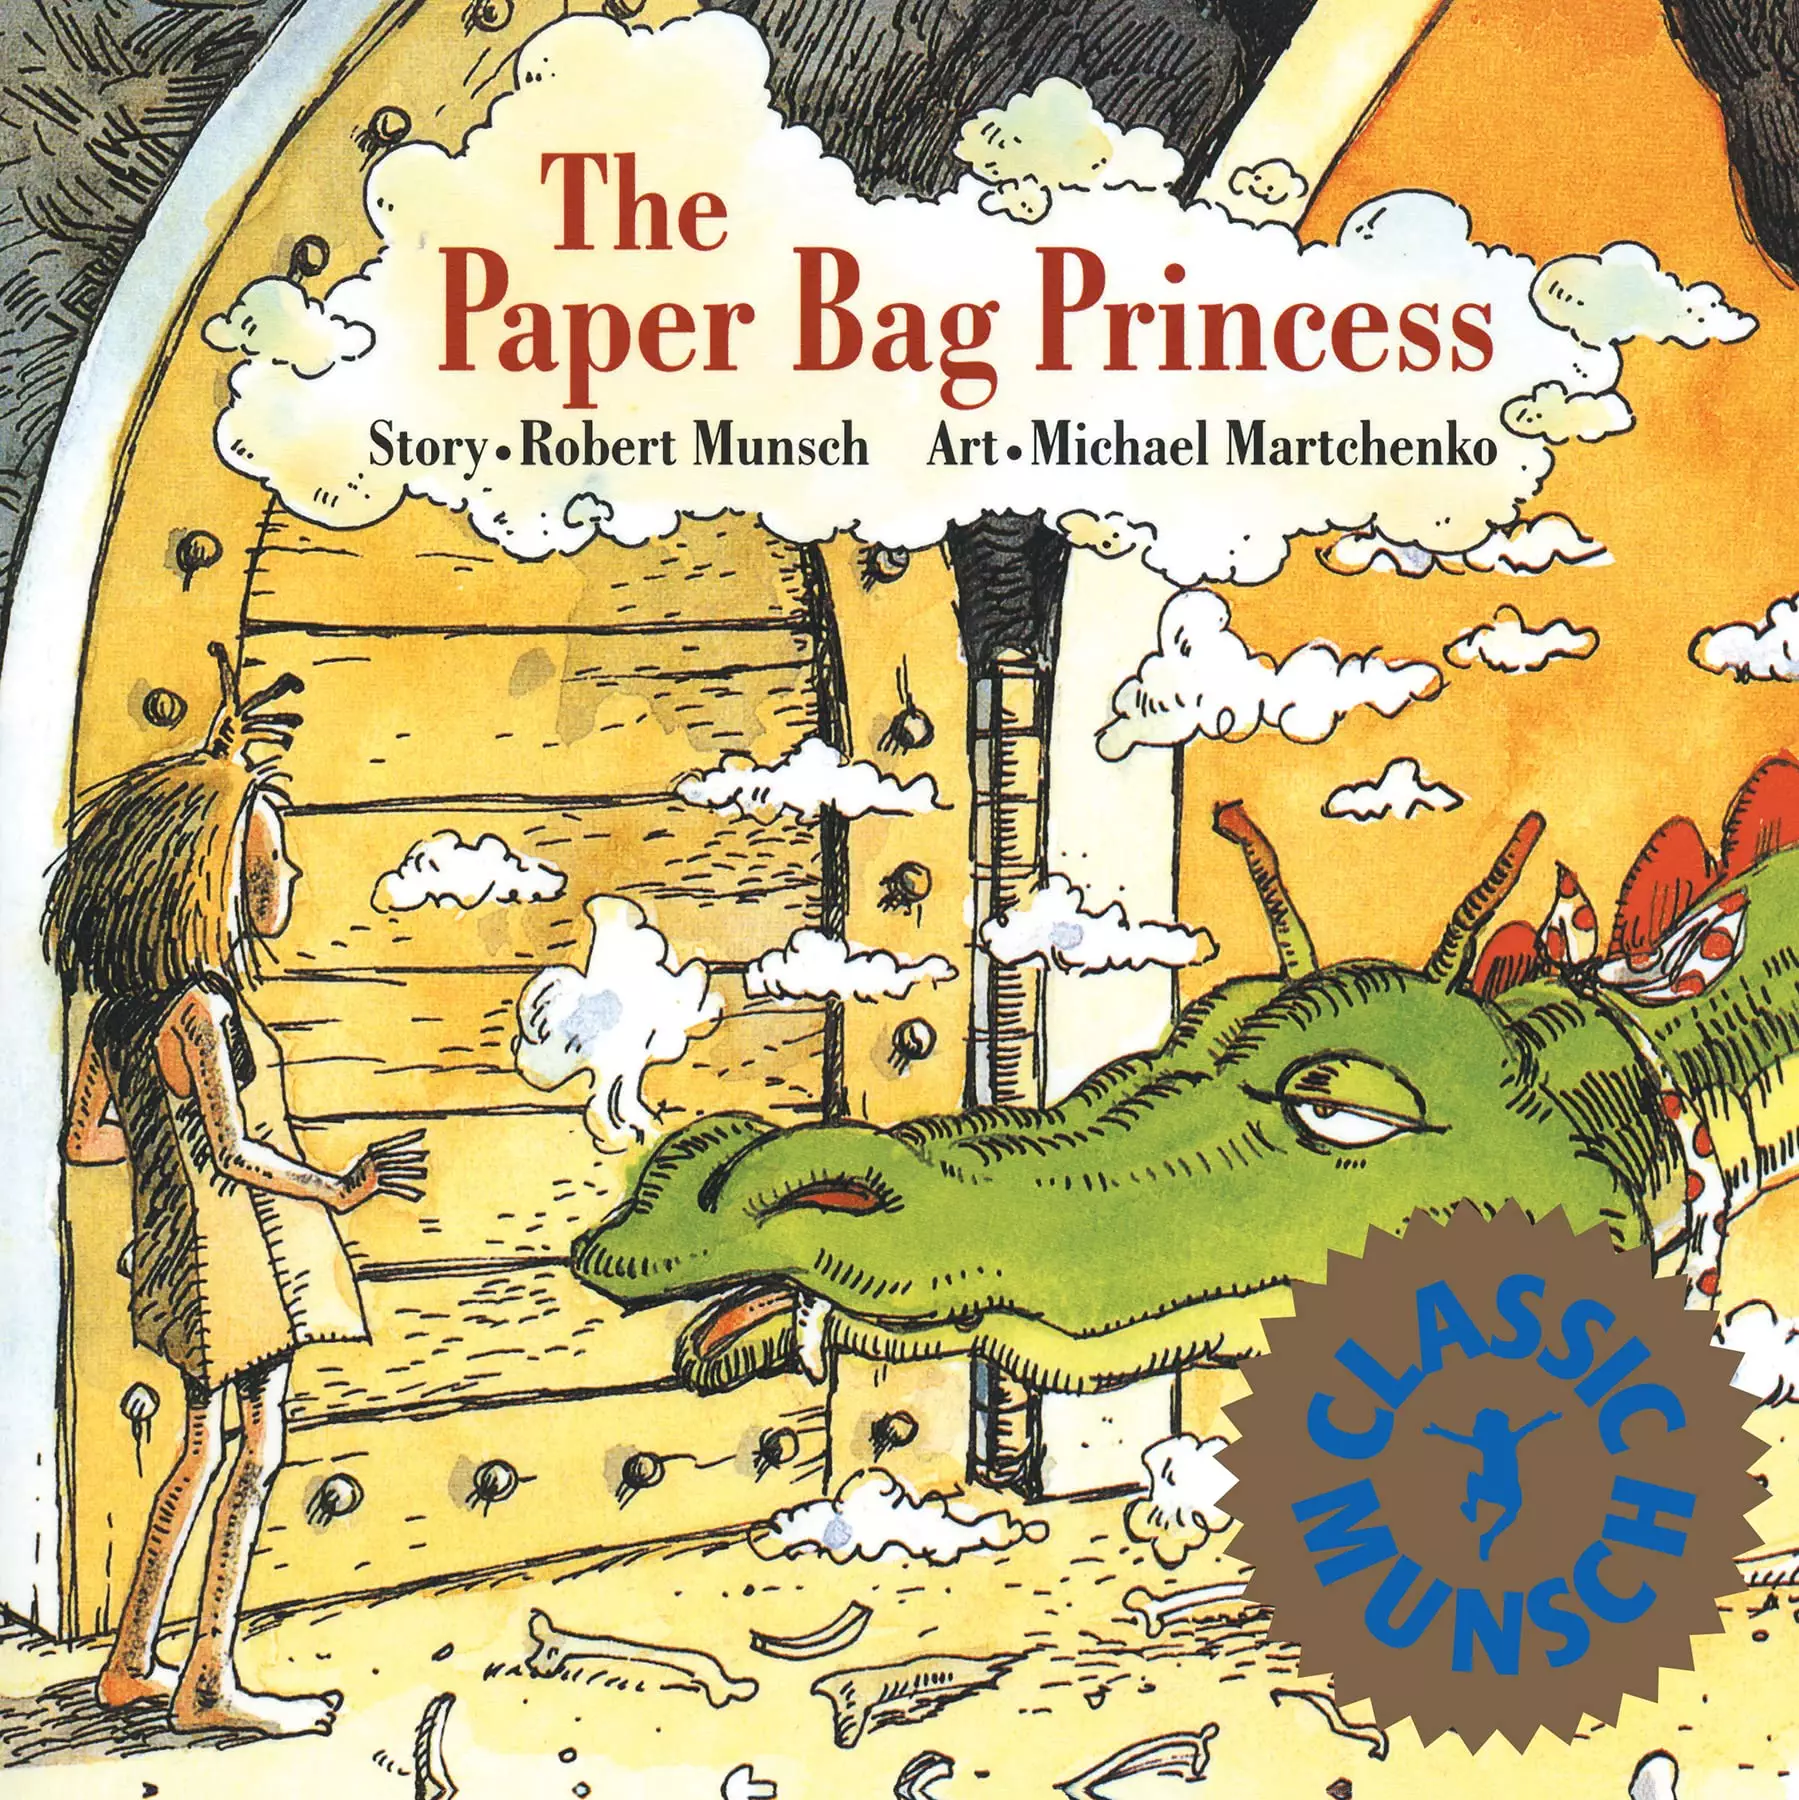 Buy The Paper Bag Princess (Munsch for Kids) Book Online at Low Prices in  India | The Paper Bag Princess (Munsch for Kids) Reviews & Ratings -  Amazon.in